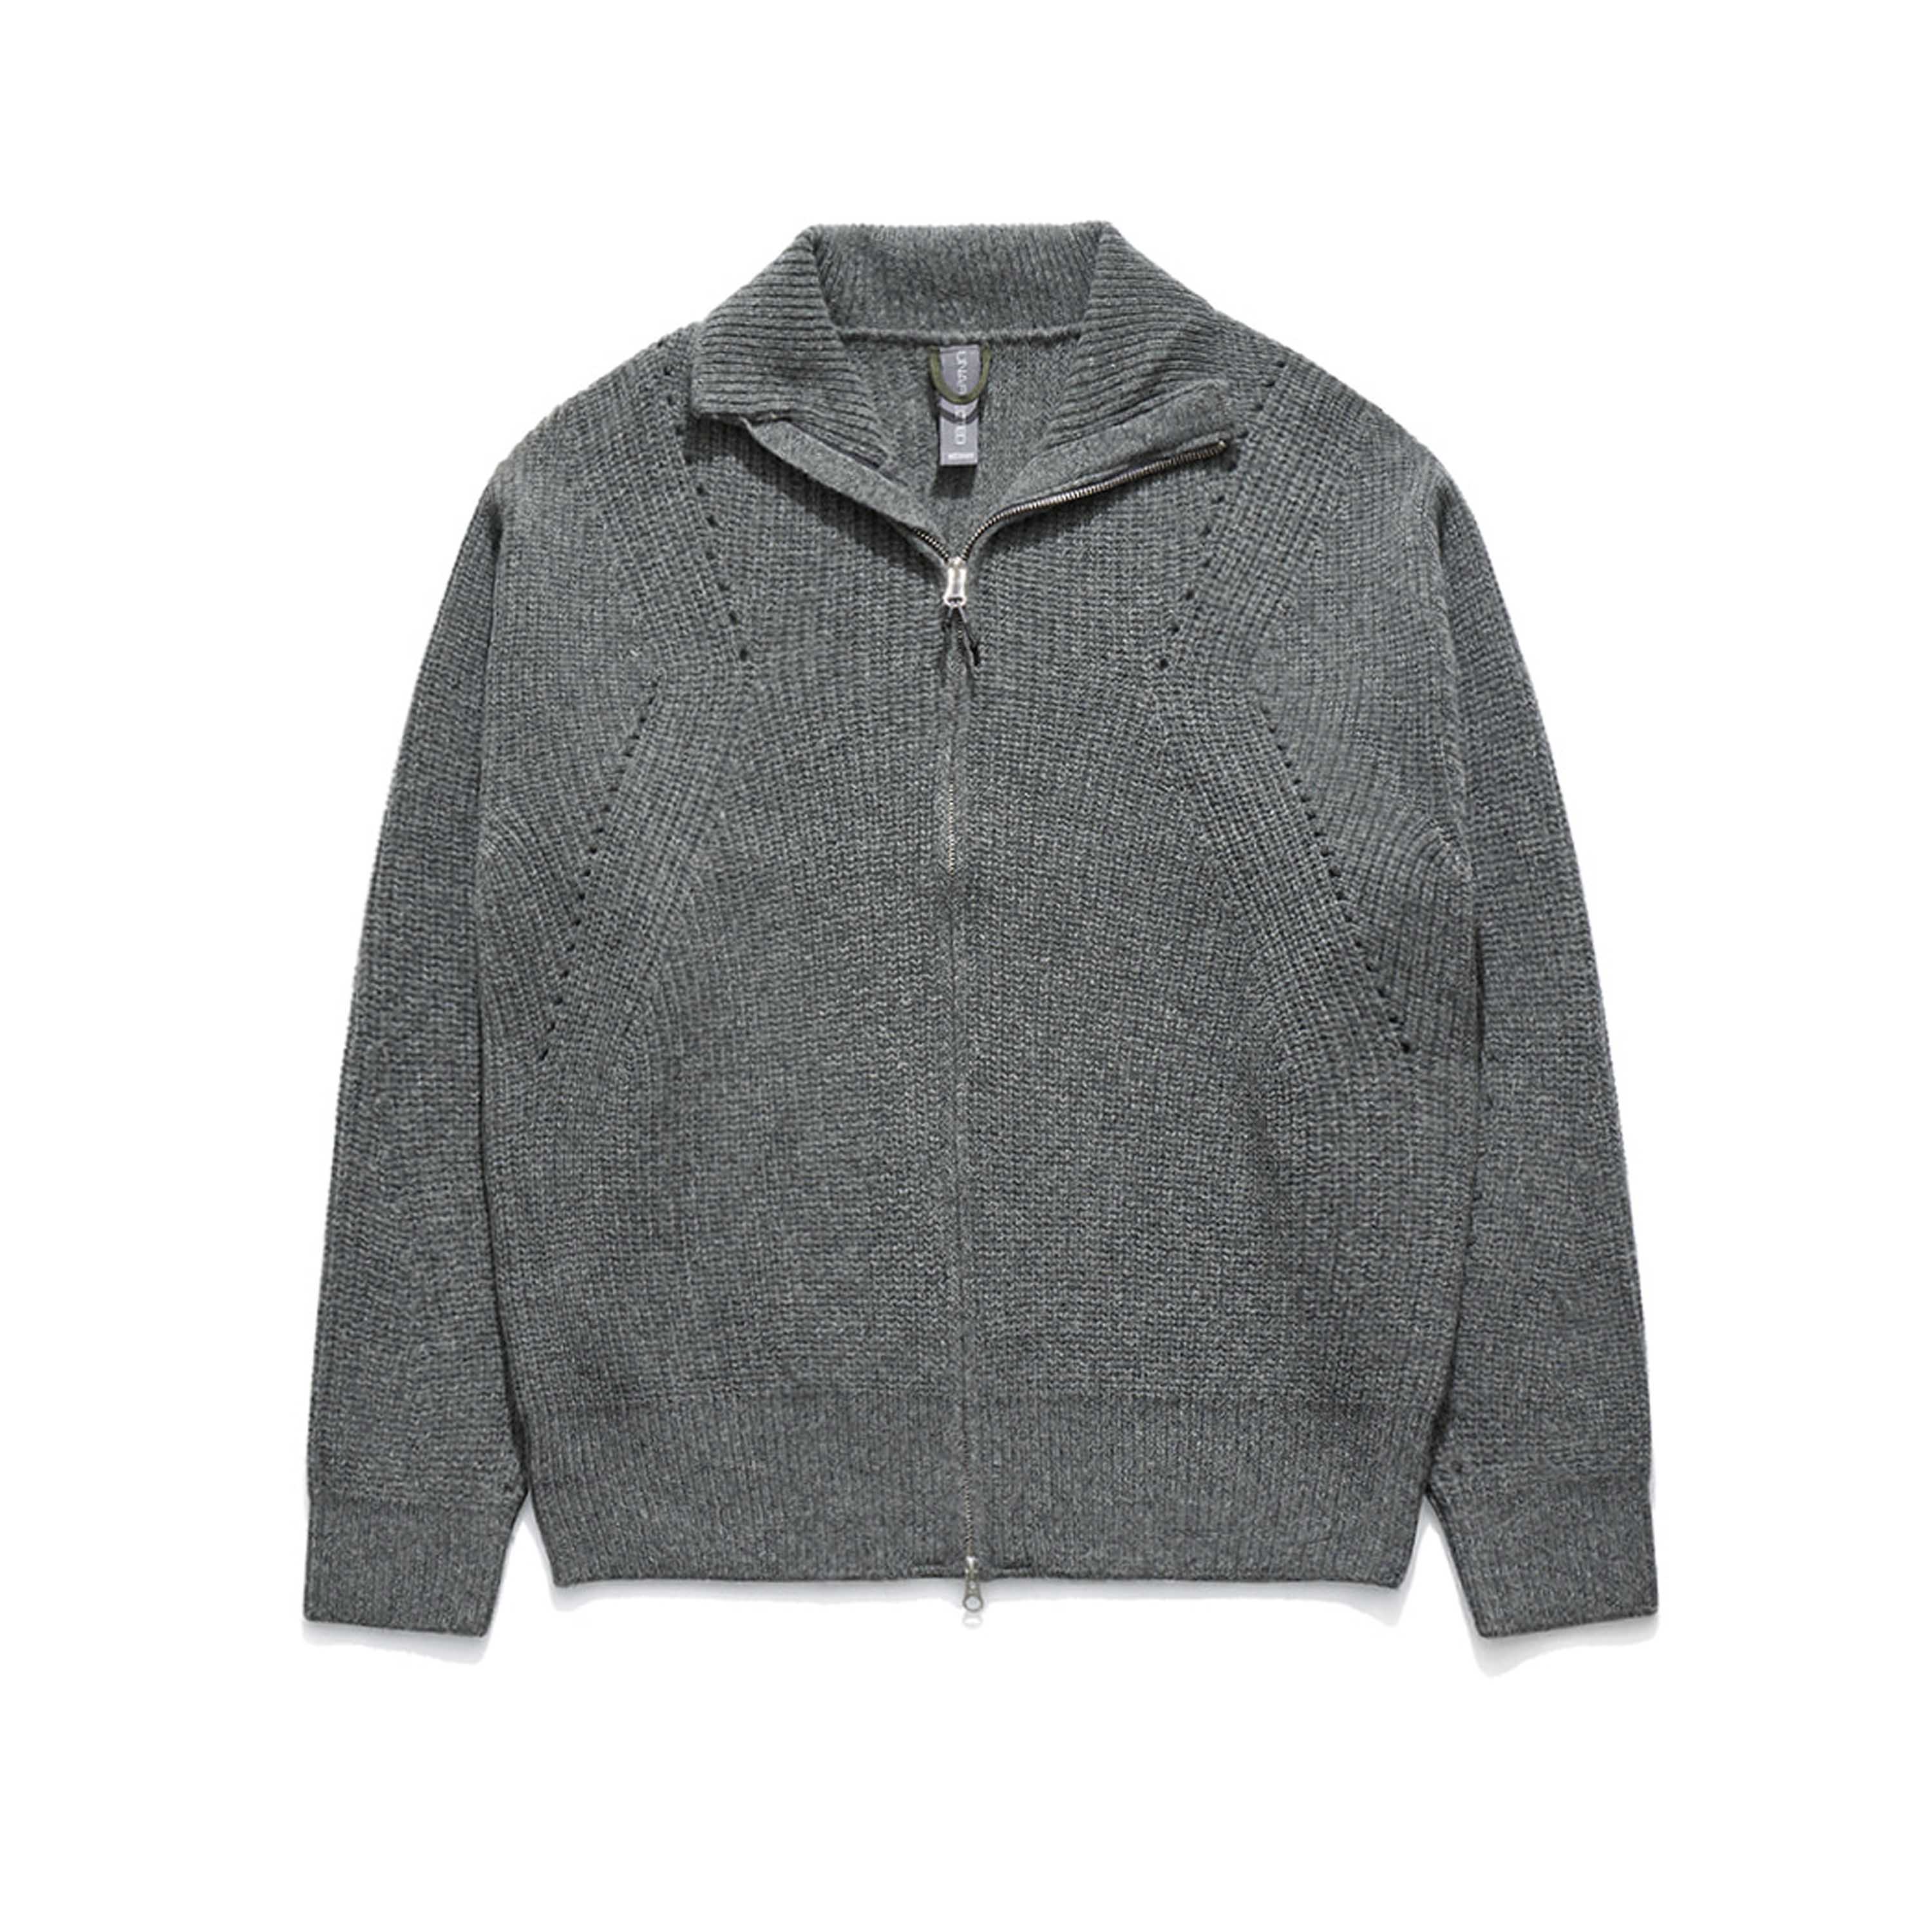 KNITTED ZIP-UP CARDIGAN - CHARCOAL MELANGE